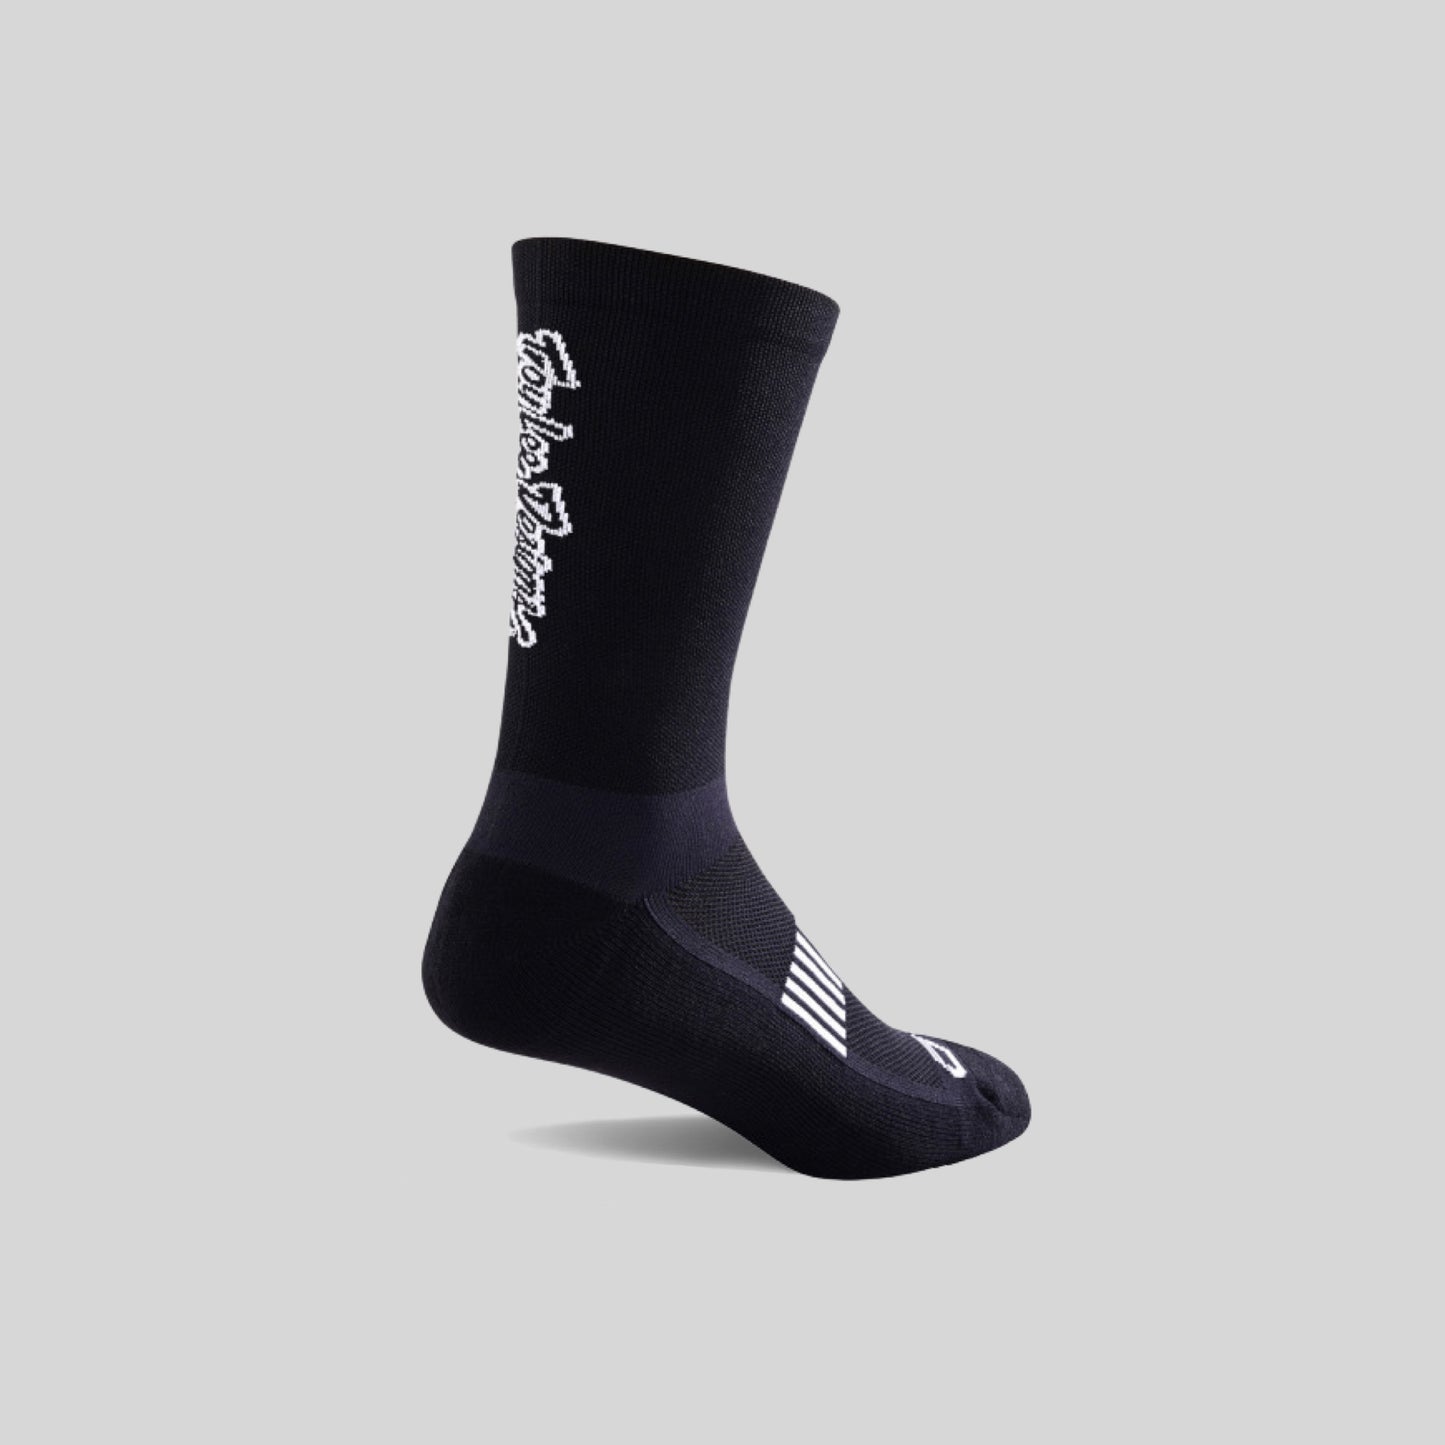 Troy Lee Designs Performance Signature Socks Black from Ascender Cycling Club Zürich Switzerland Right Side View